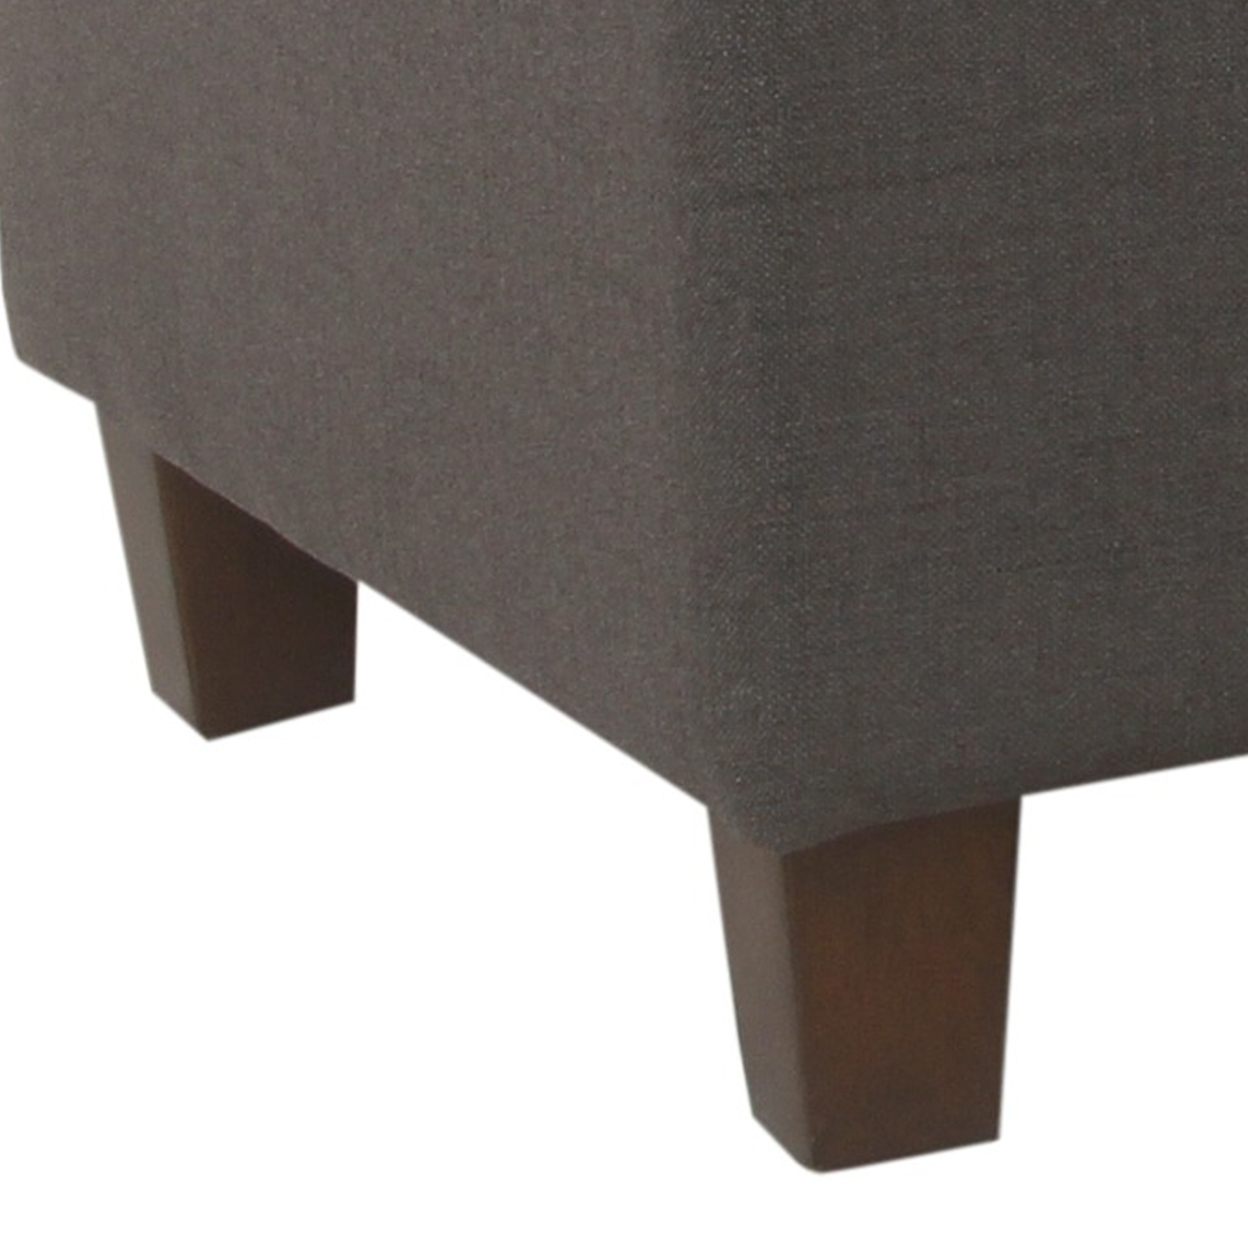 Fabric Upholstered Button Tufted Wooden Bench With Hinged Storage, Dark Gray And Brown- Saltoro Sherpi